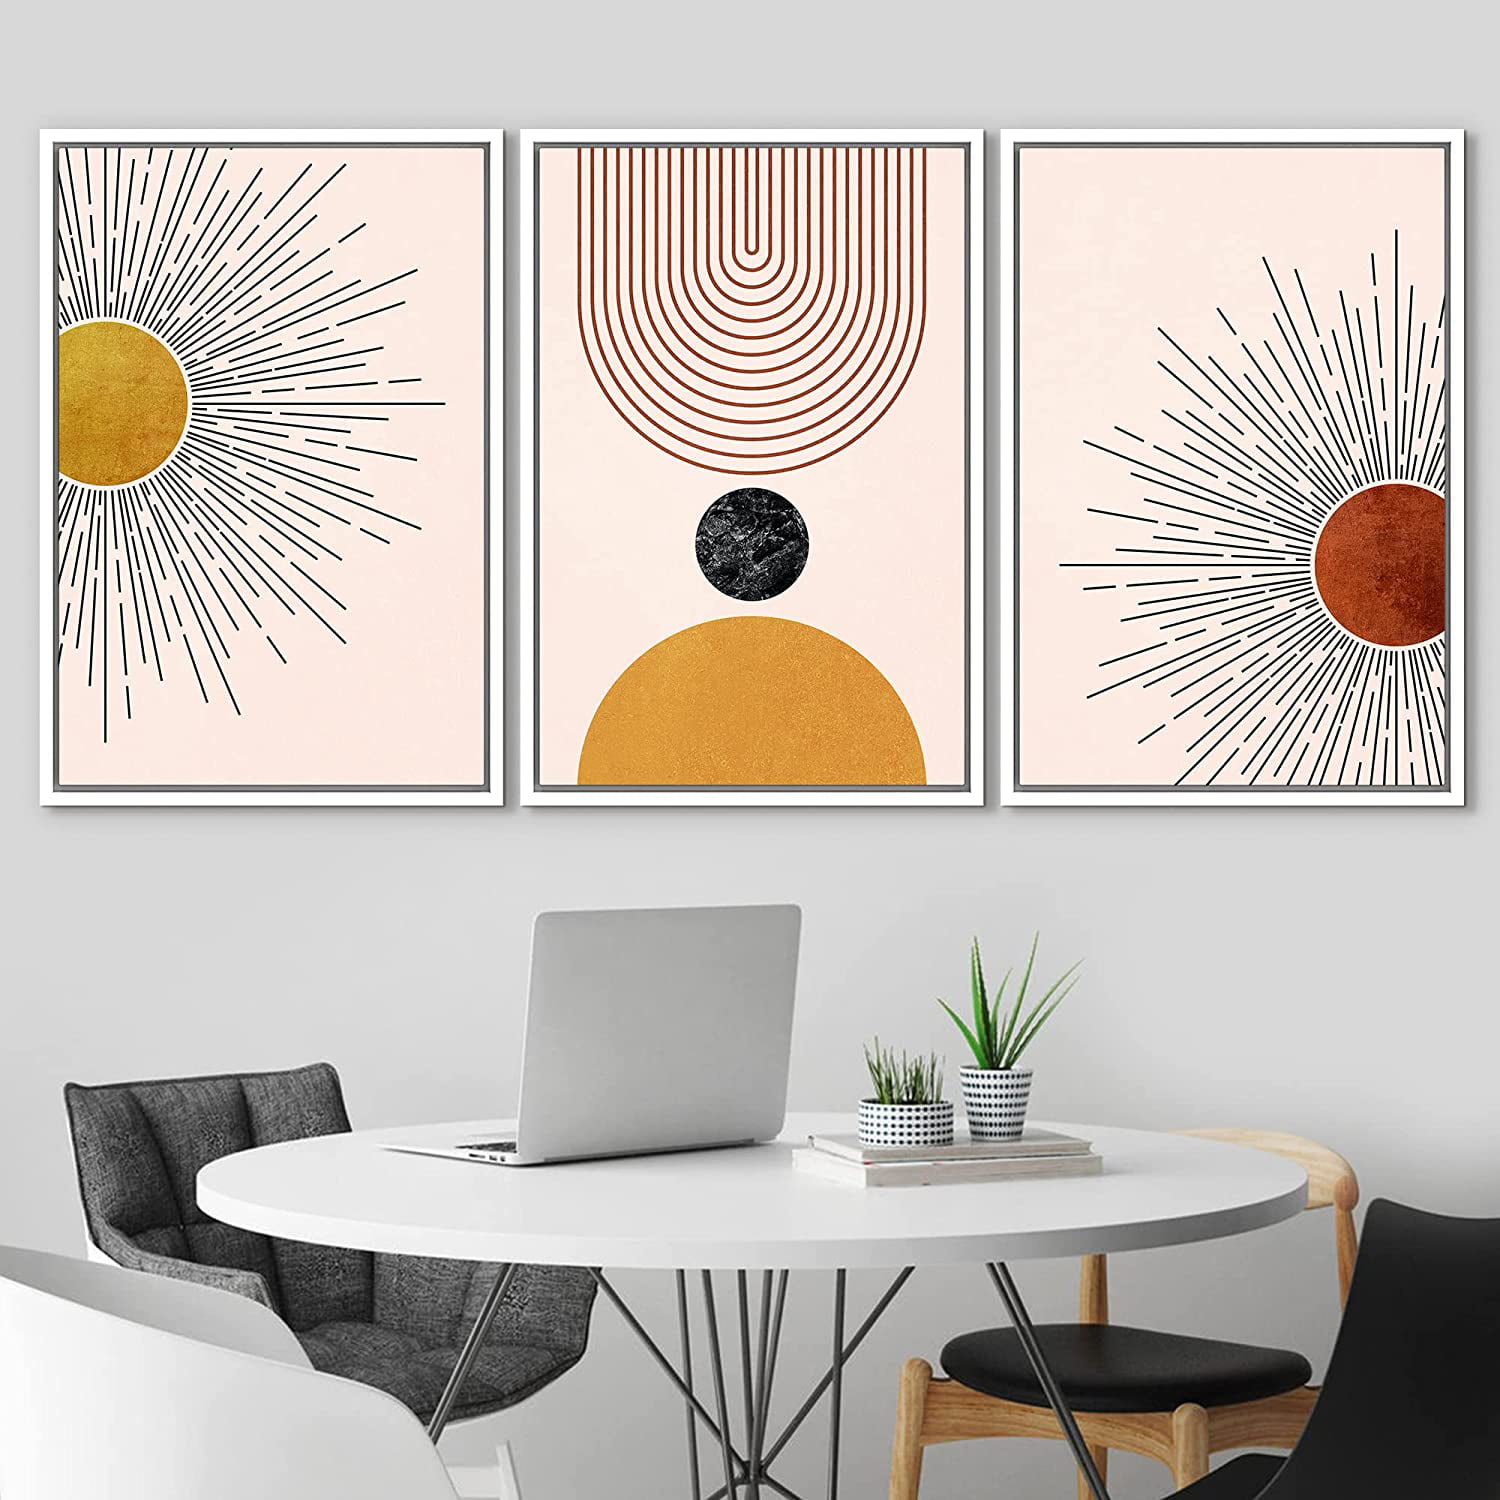 IDEA4WALL Framed Canvas Print Wall Art Set Mid-Century Geometric Solar Sun  Space Planets Abstract Shapes Minimalism Boho Decorative for Living Room,  Bedroom, Office 24